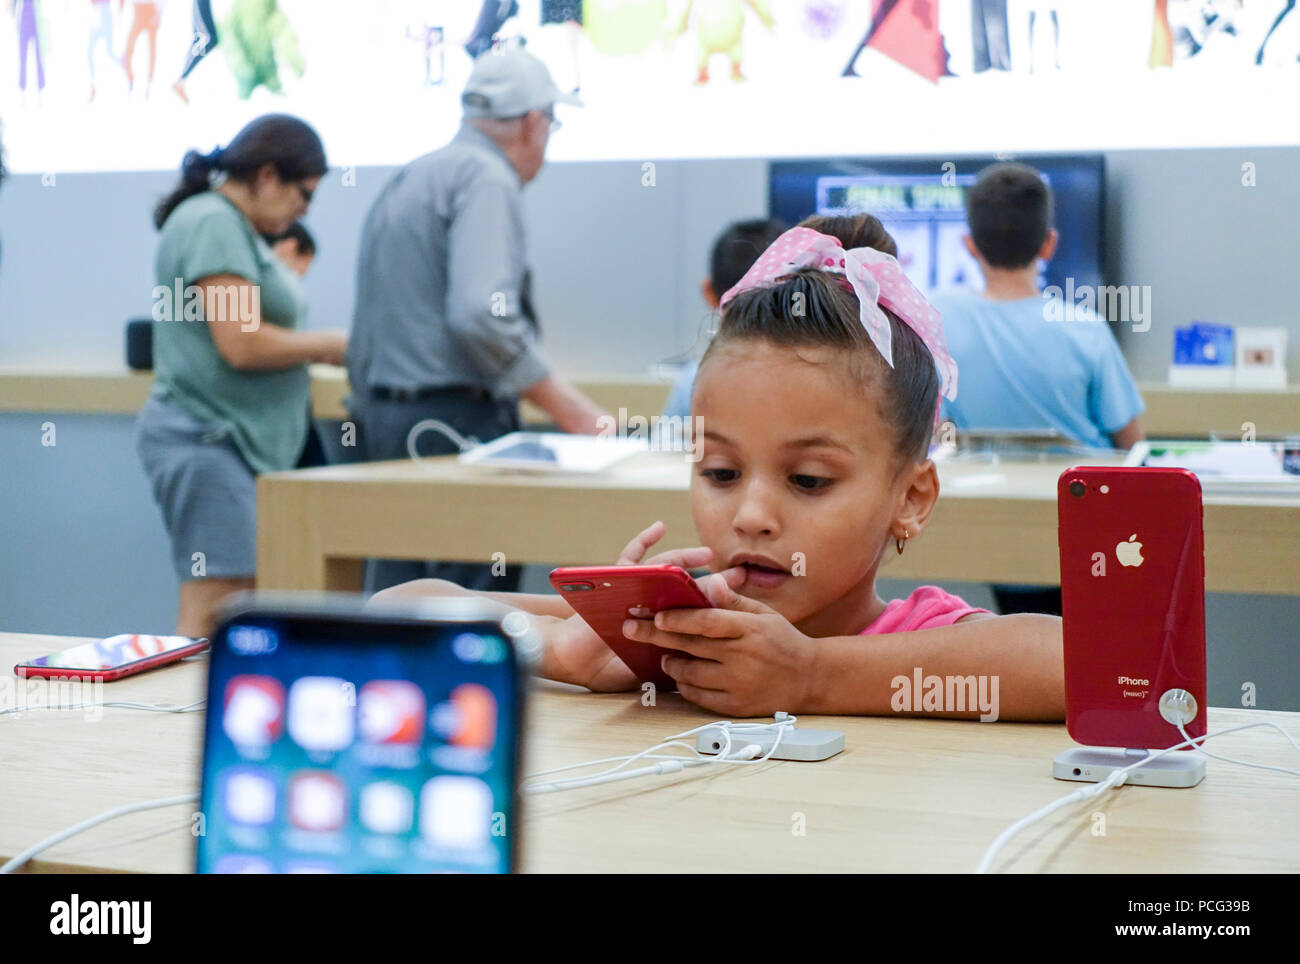 New York, USA. 2nd Aug, 2018. A girl tries a product at an Apple store in New York, the United States, Aug. 2, 2018. U.S. tech giant Apple became the first American company that saw its market cap hit 1 trillion U.S. dollars in the U.S. history after its shares rose 2.8 percent to a session high of 207.05 dollars around midday trading on Thursday. Credit: Wang Ying/Xinhua/Alamy Live News Stock Photo